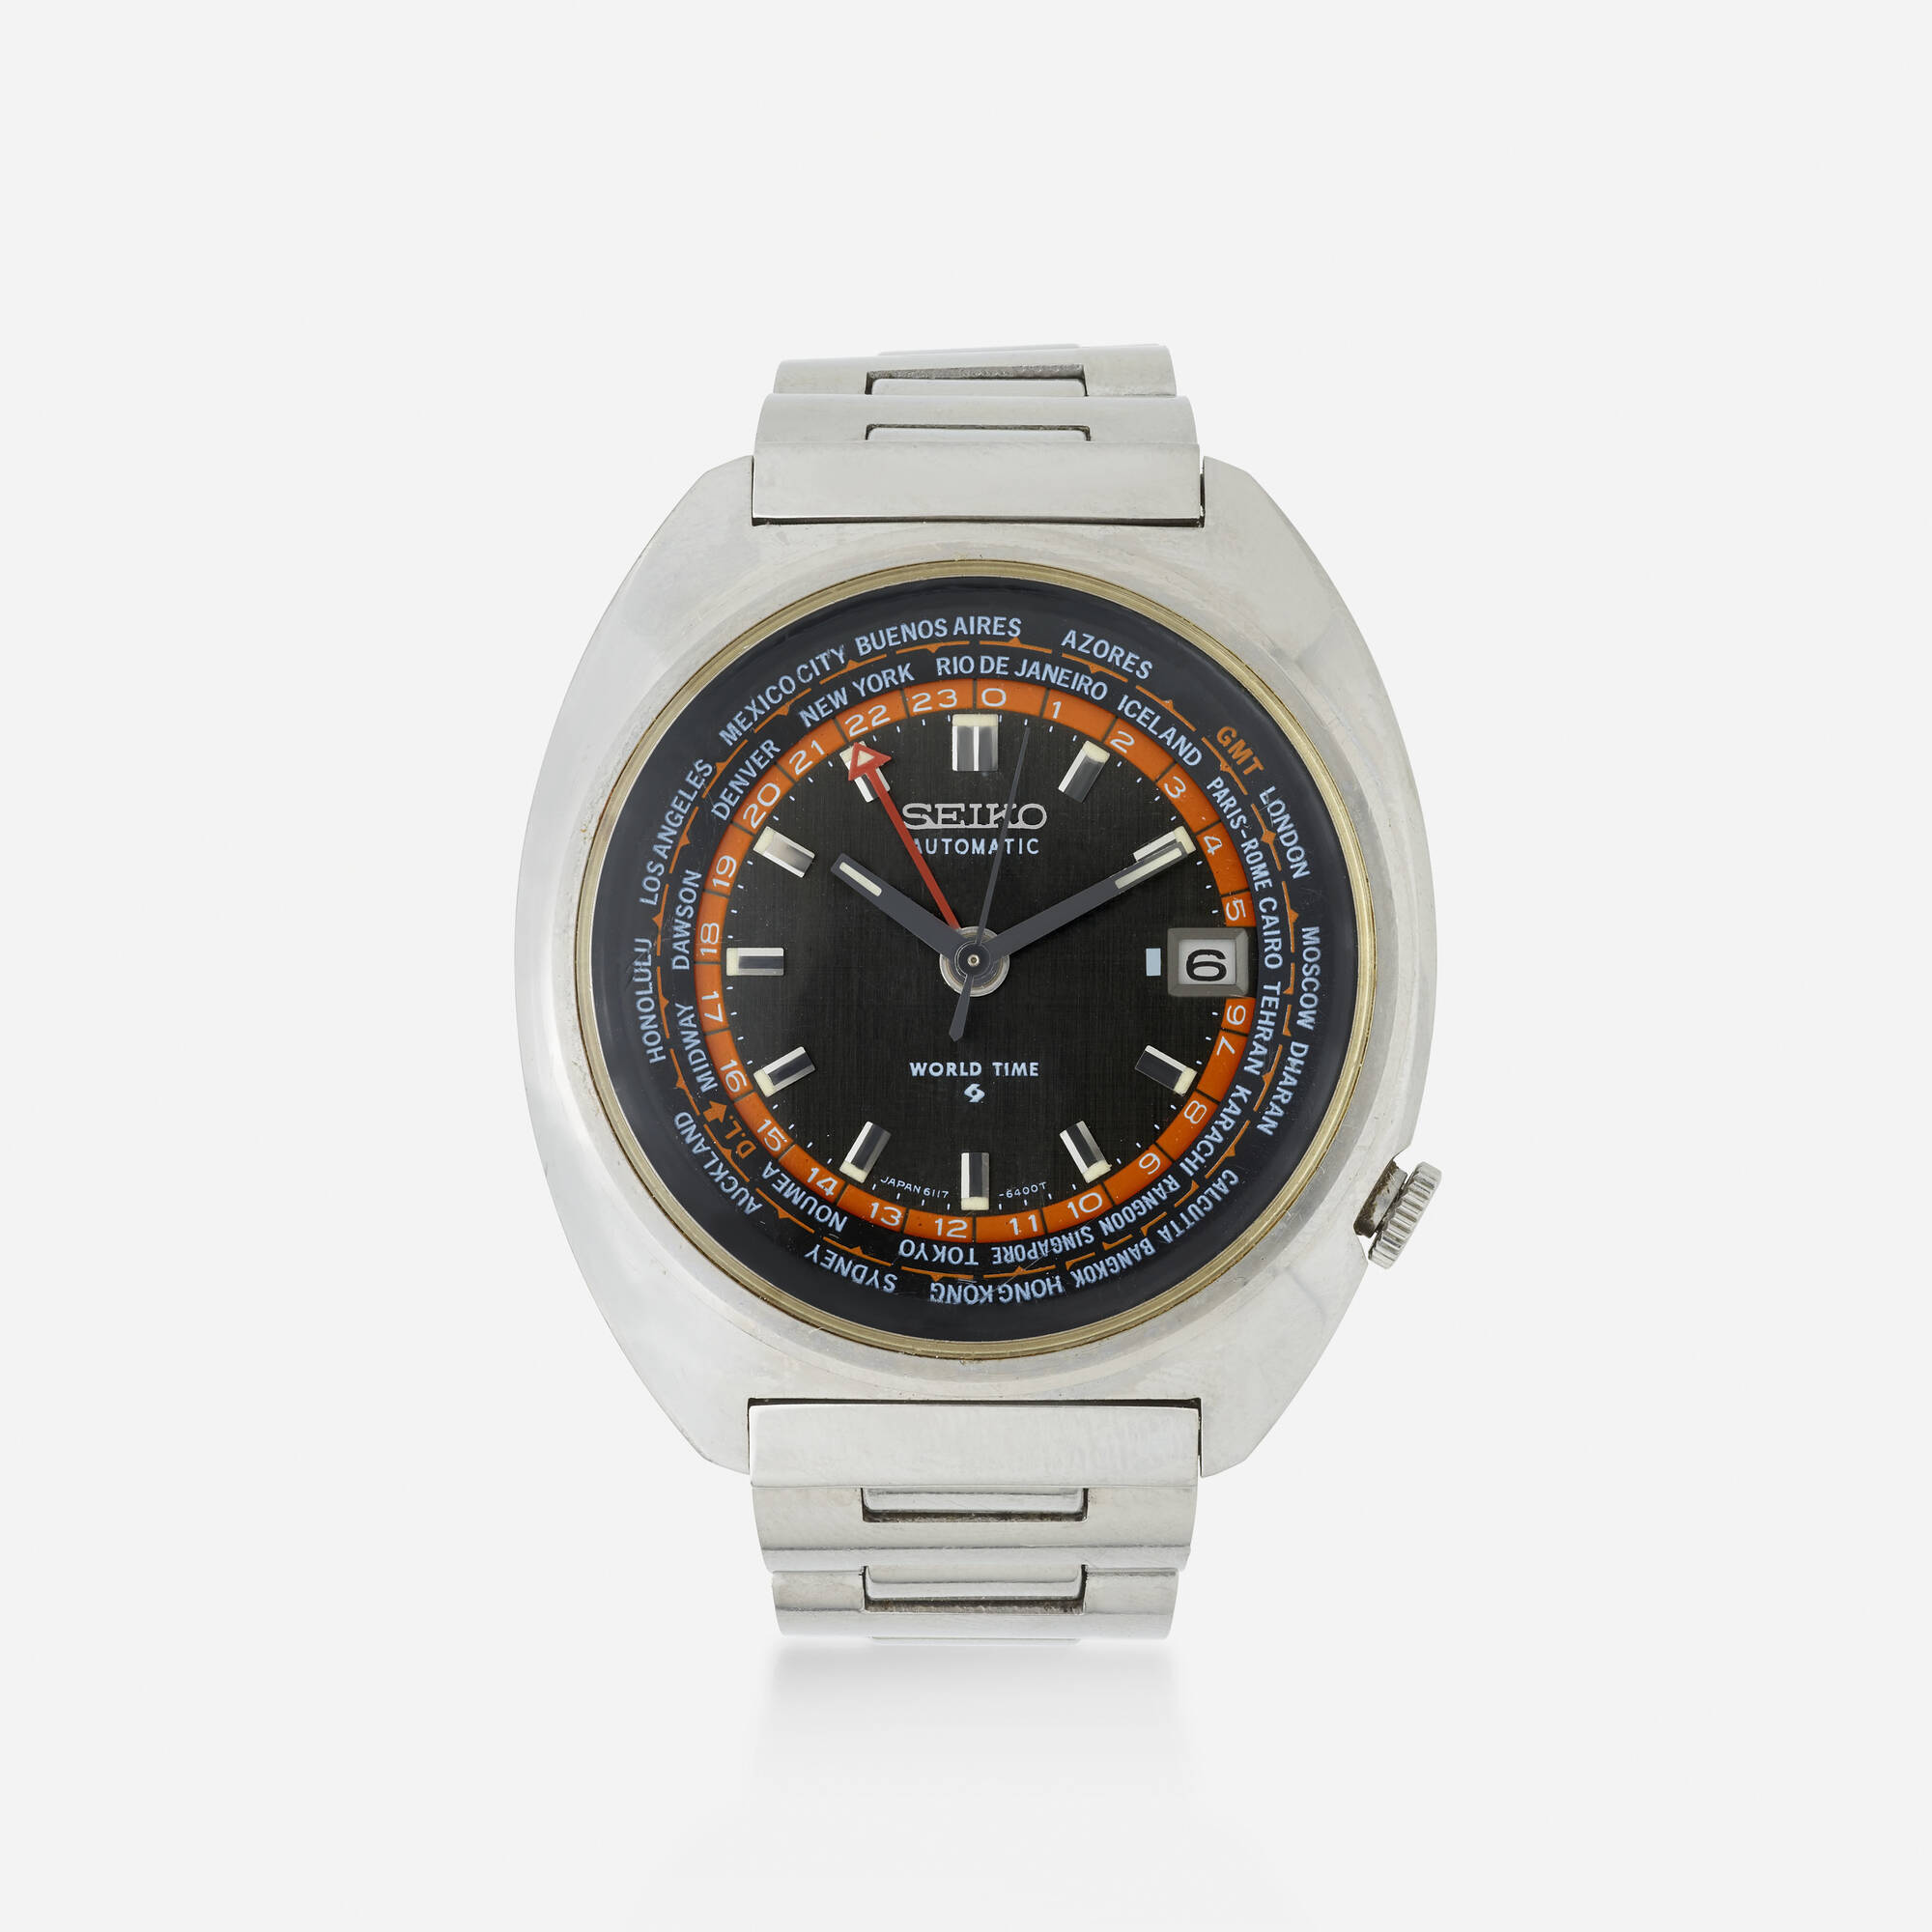 275: SEIKO, 'World Time' wristwatch, Ref. 6117-6400T < Important Design, 10  June 2021 < Auctions | Wright: Auctions of Art and Design